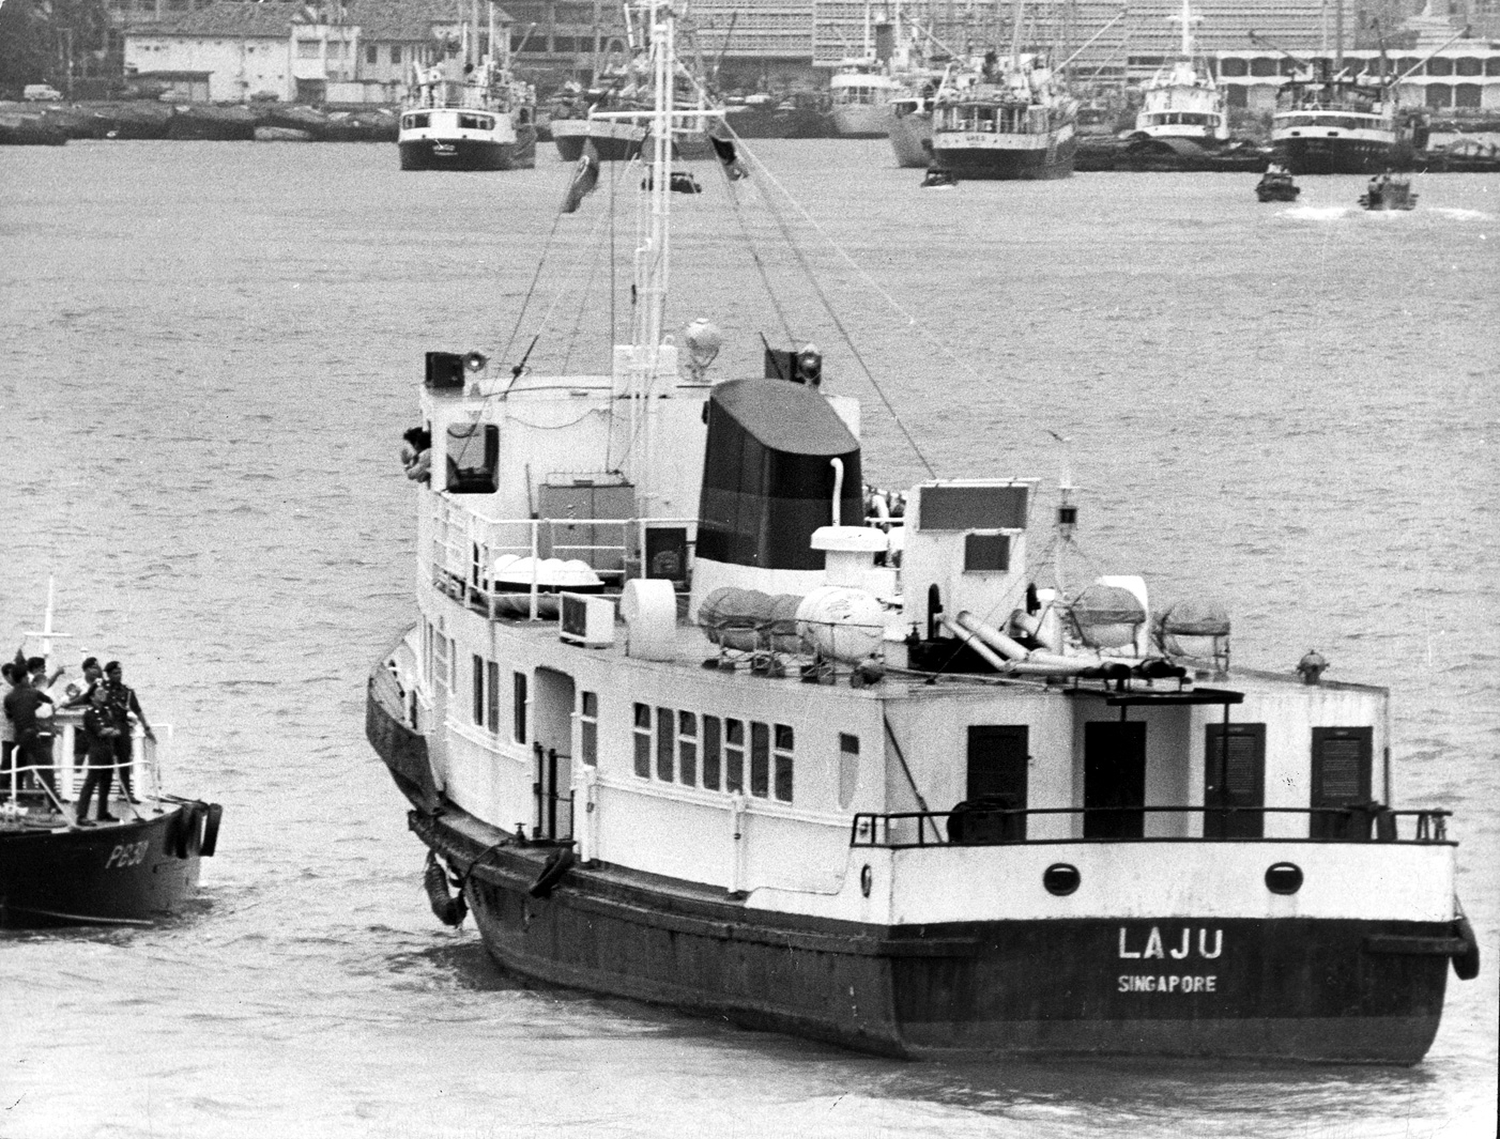 a black and white image of a boat at sea, with a smaller boat beside. The smaller boat has a police officer talking towards the big boat, Laju. 